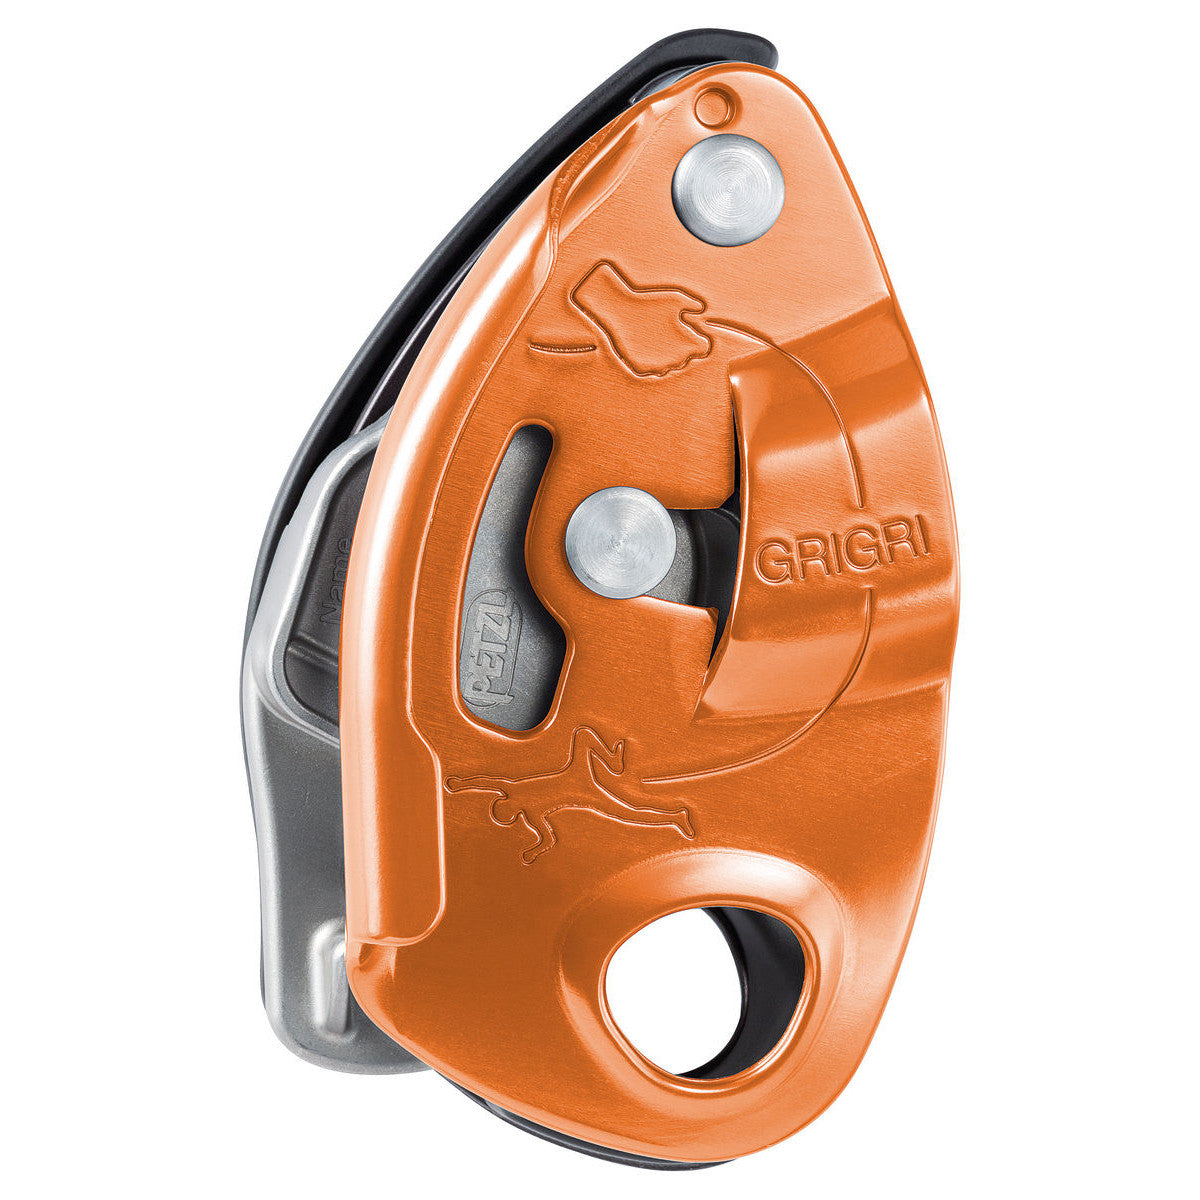 Petzl Grigri belay device, showing side view in orange colour